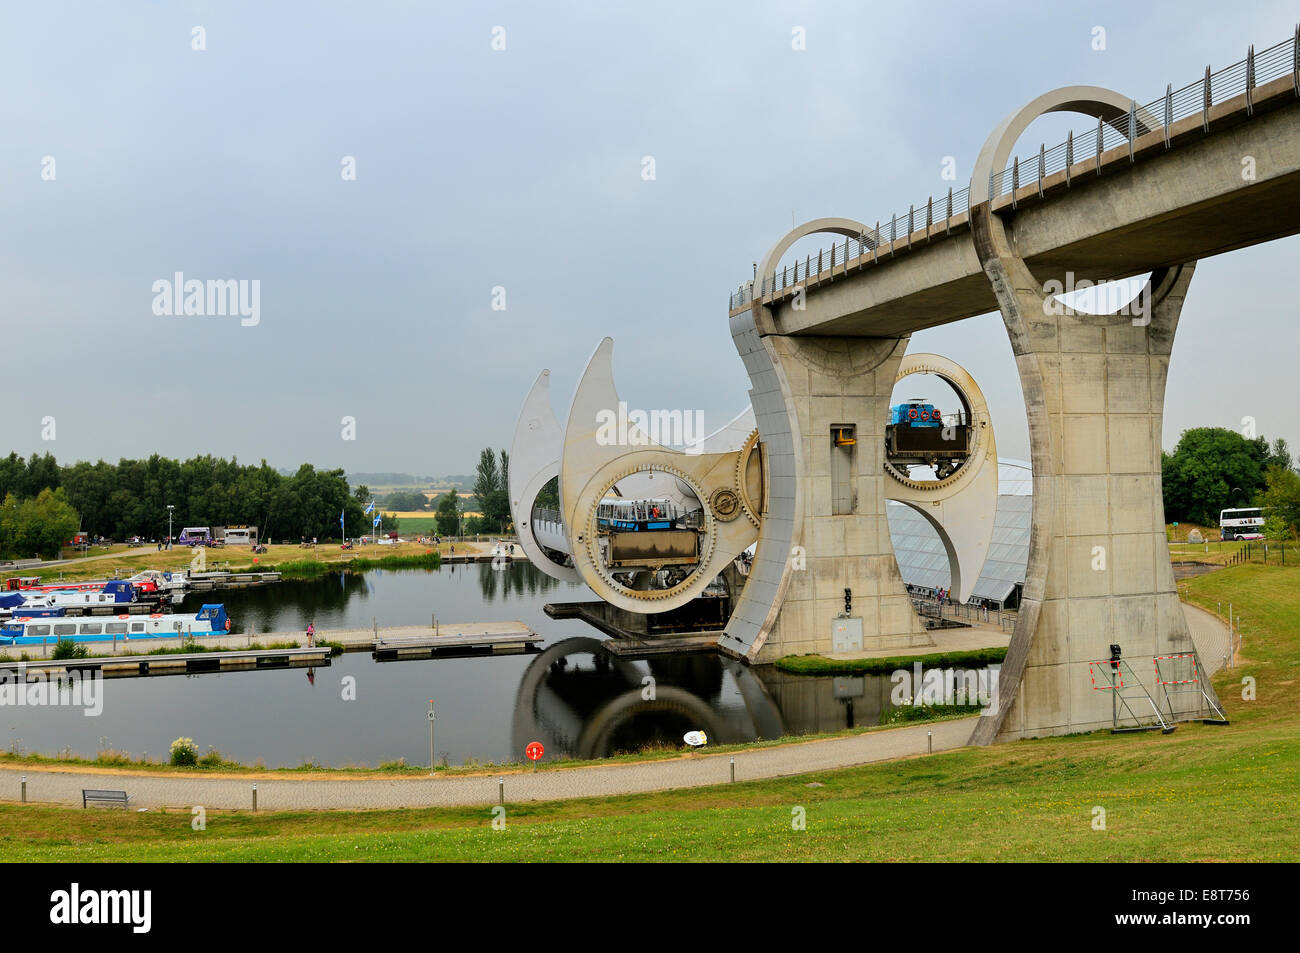 The Falkirk Wheel, unique boat lift in the shape of a ferris wheel, connecting the Forth and Clyde Canal with the Union Canal Stock Photo